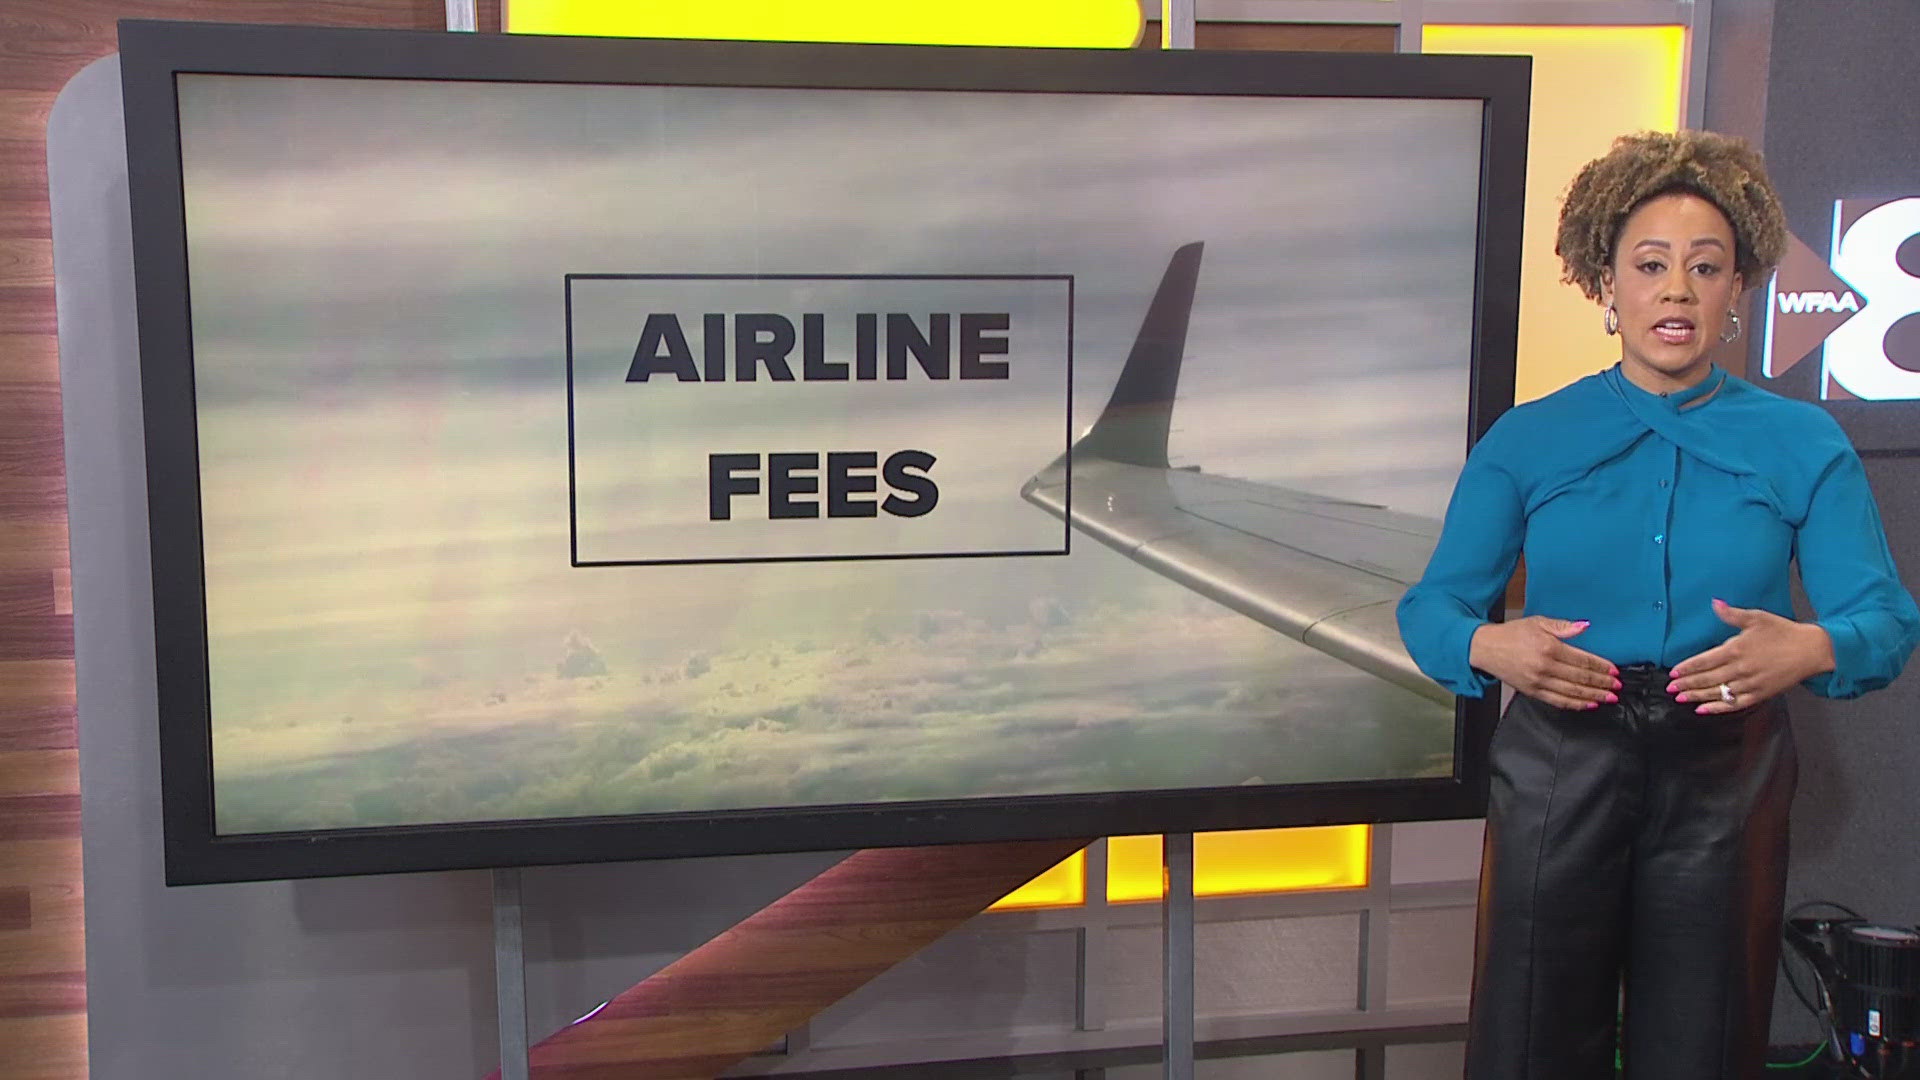 If travelers experience significant delays, airlines will be required to provide cash refunds.